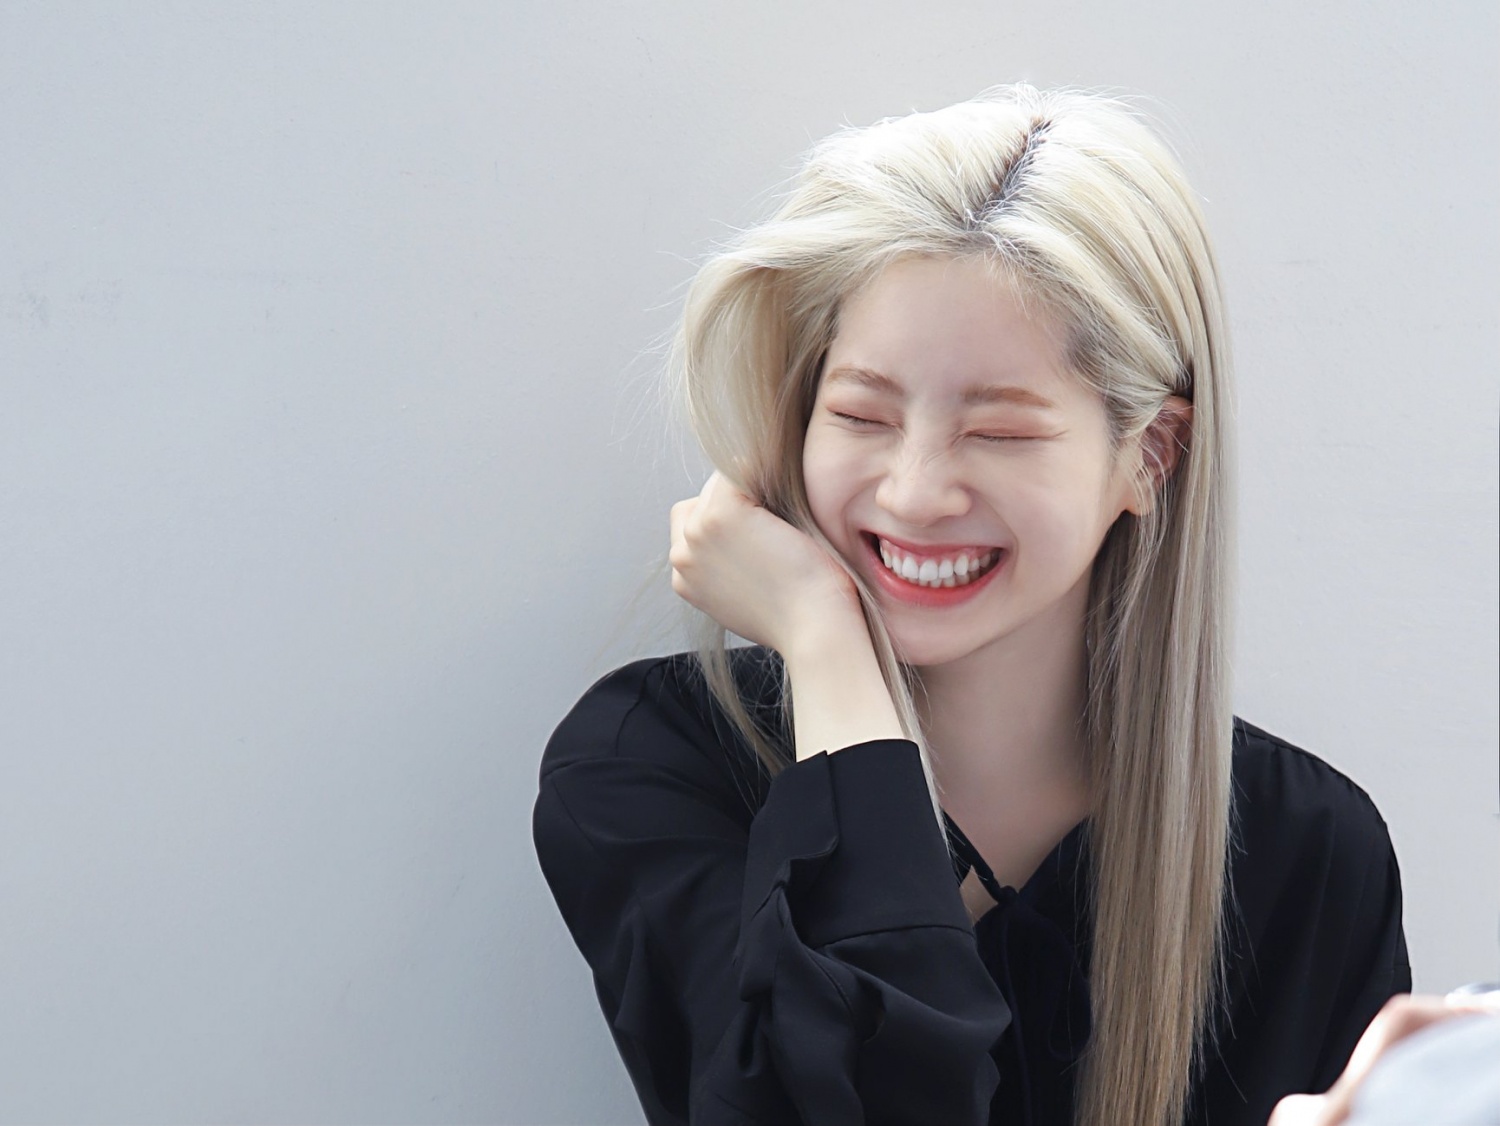 TWICE Dahyun Platinum Blonde Hairstyle + Exclusive Photos From Latest Photoshoot